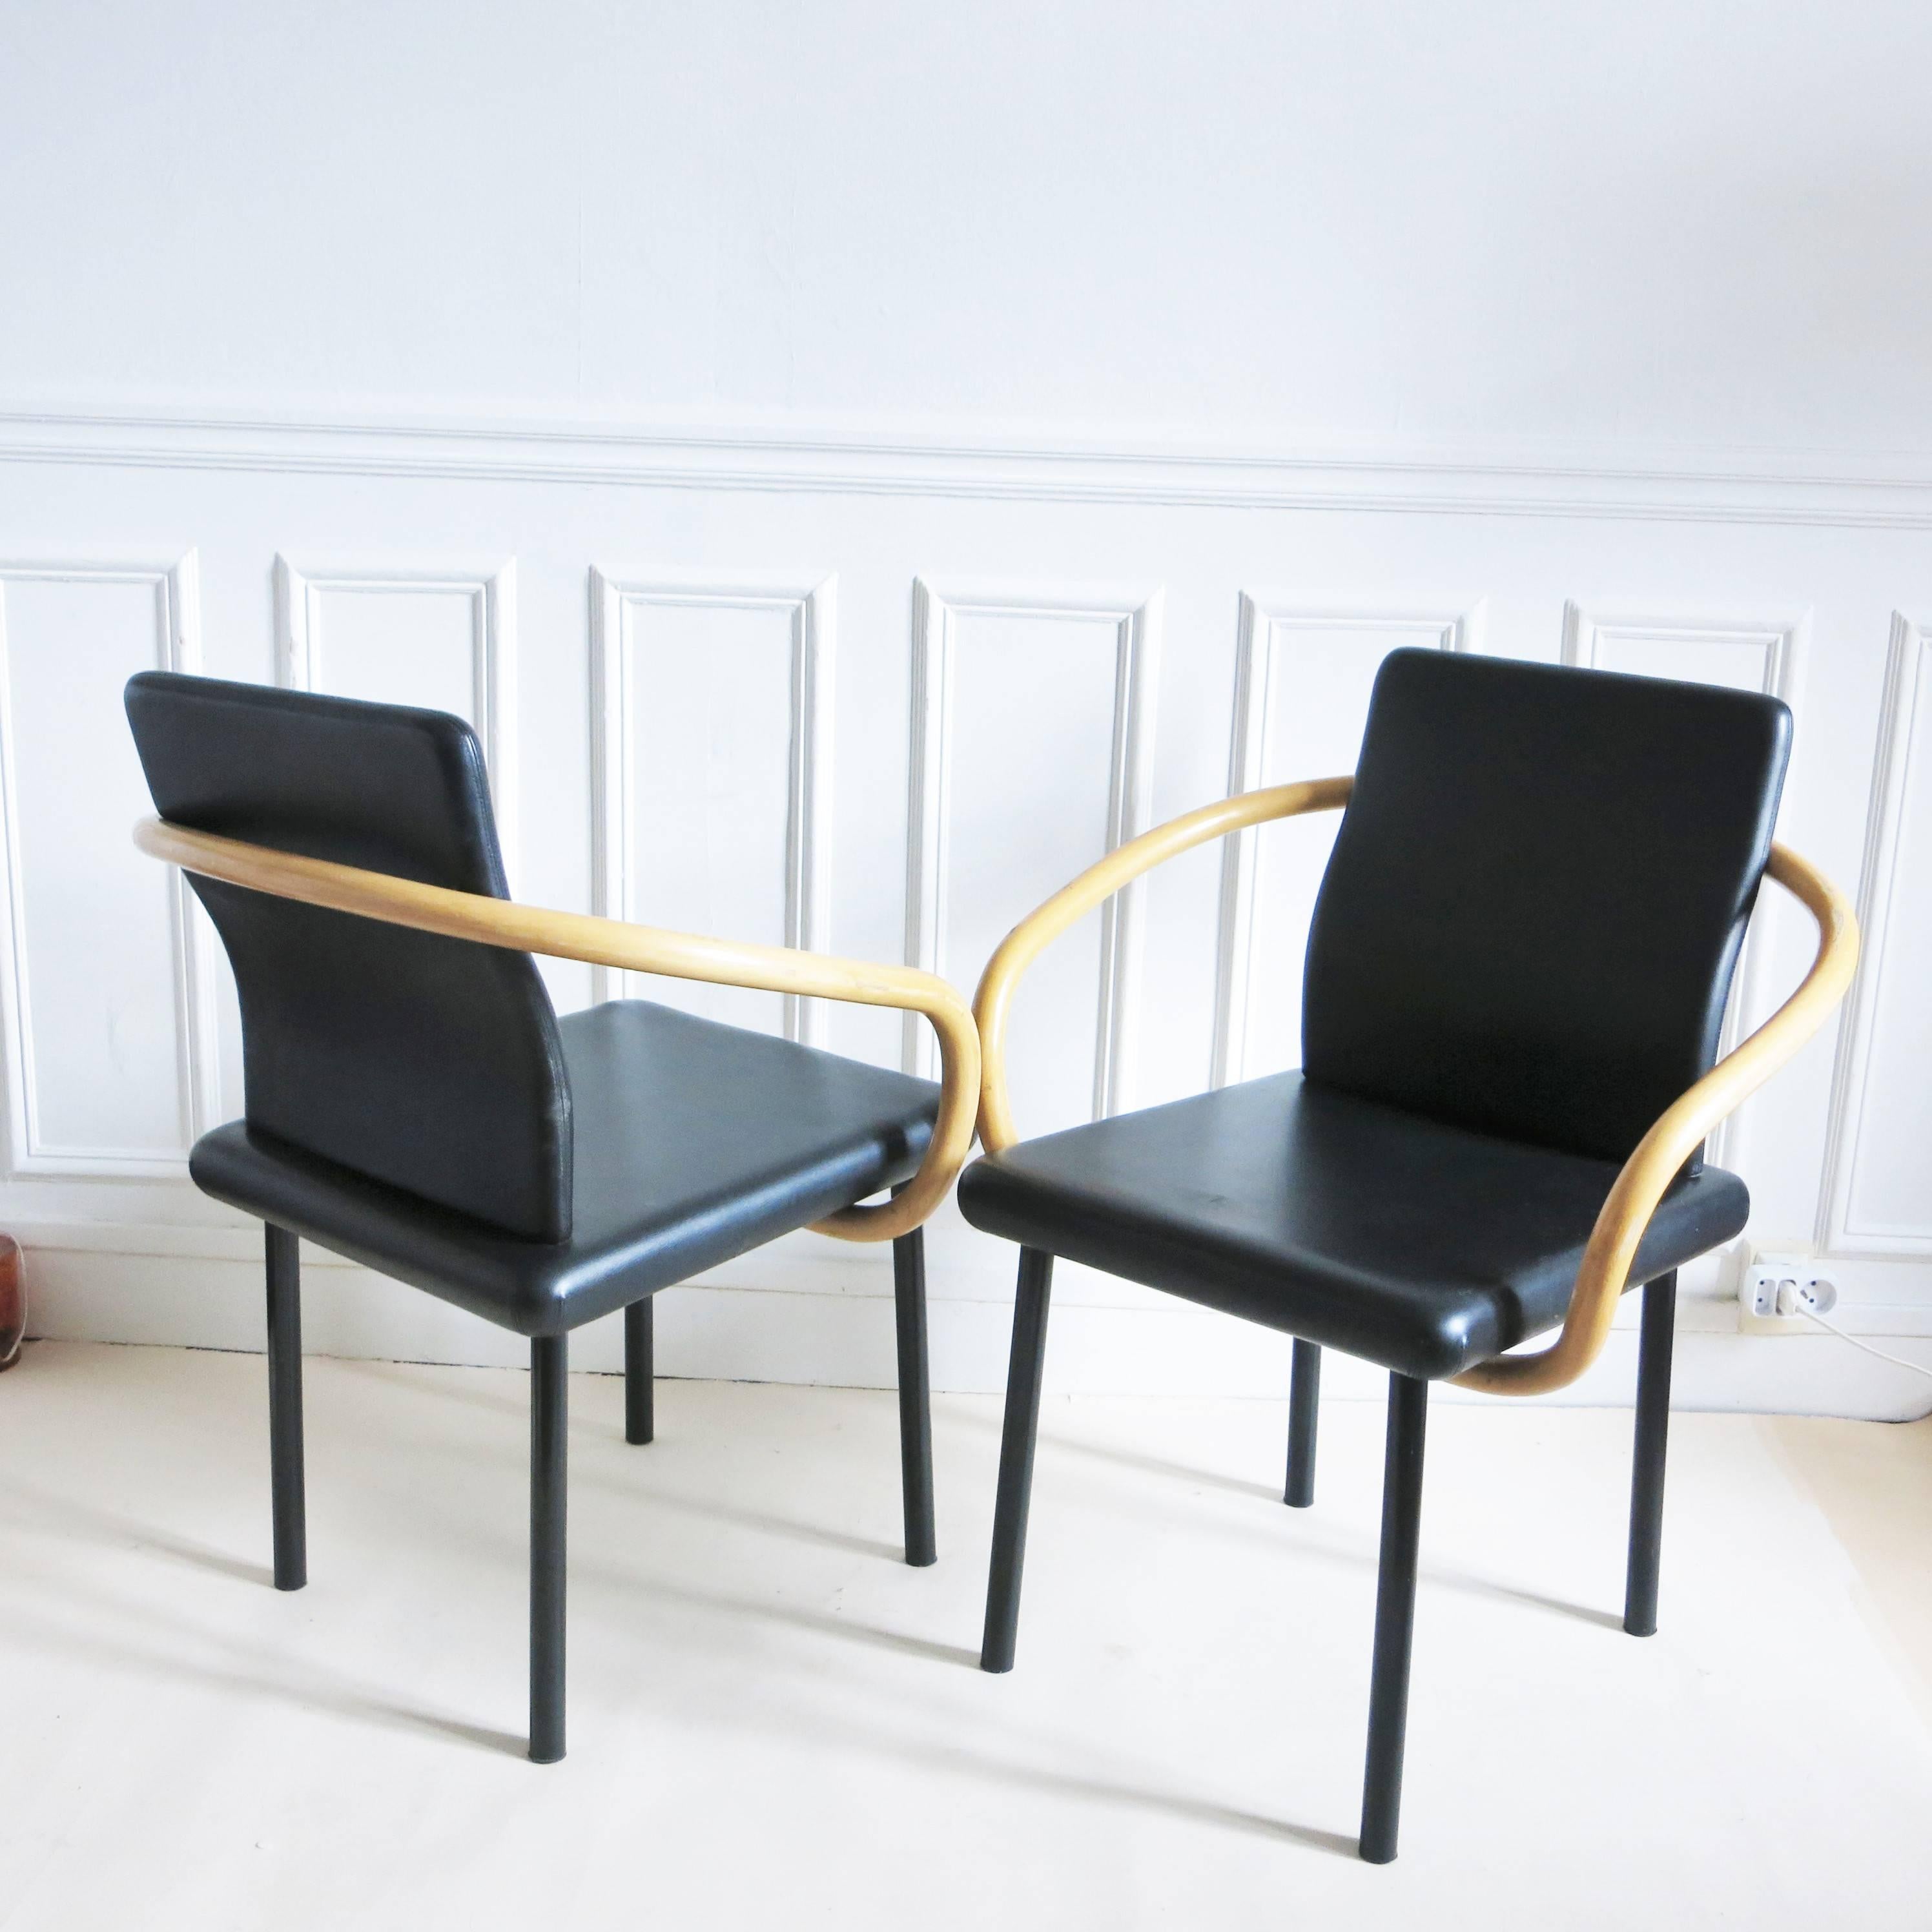 Late 20th Century Set of Four Chairs Mandarin by Ettore Sottsass for Knoll